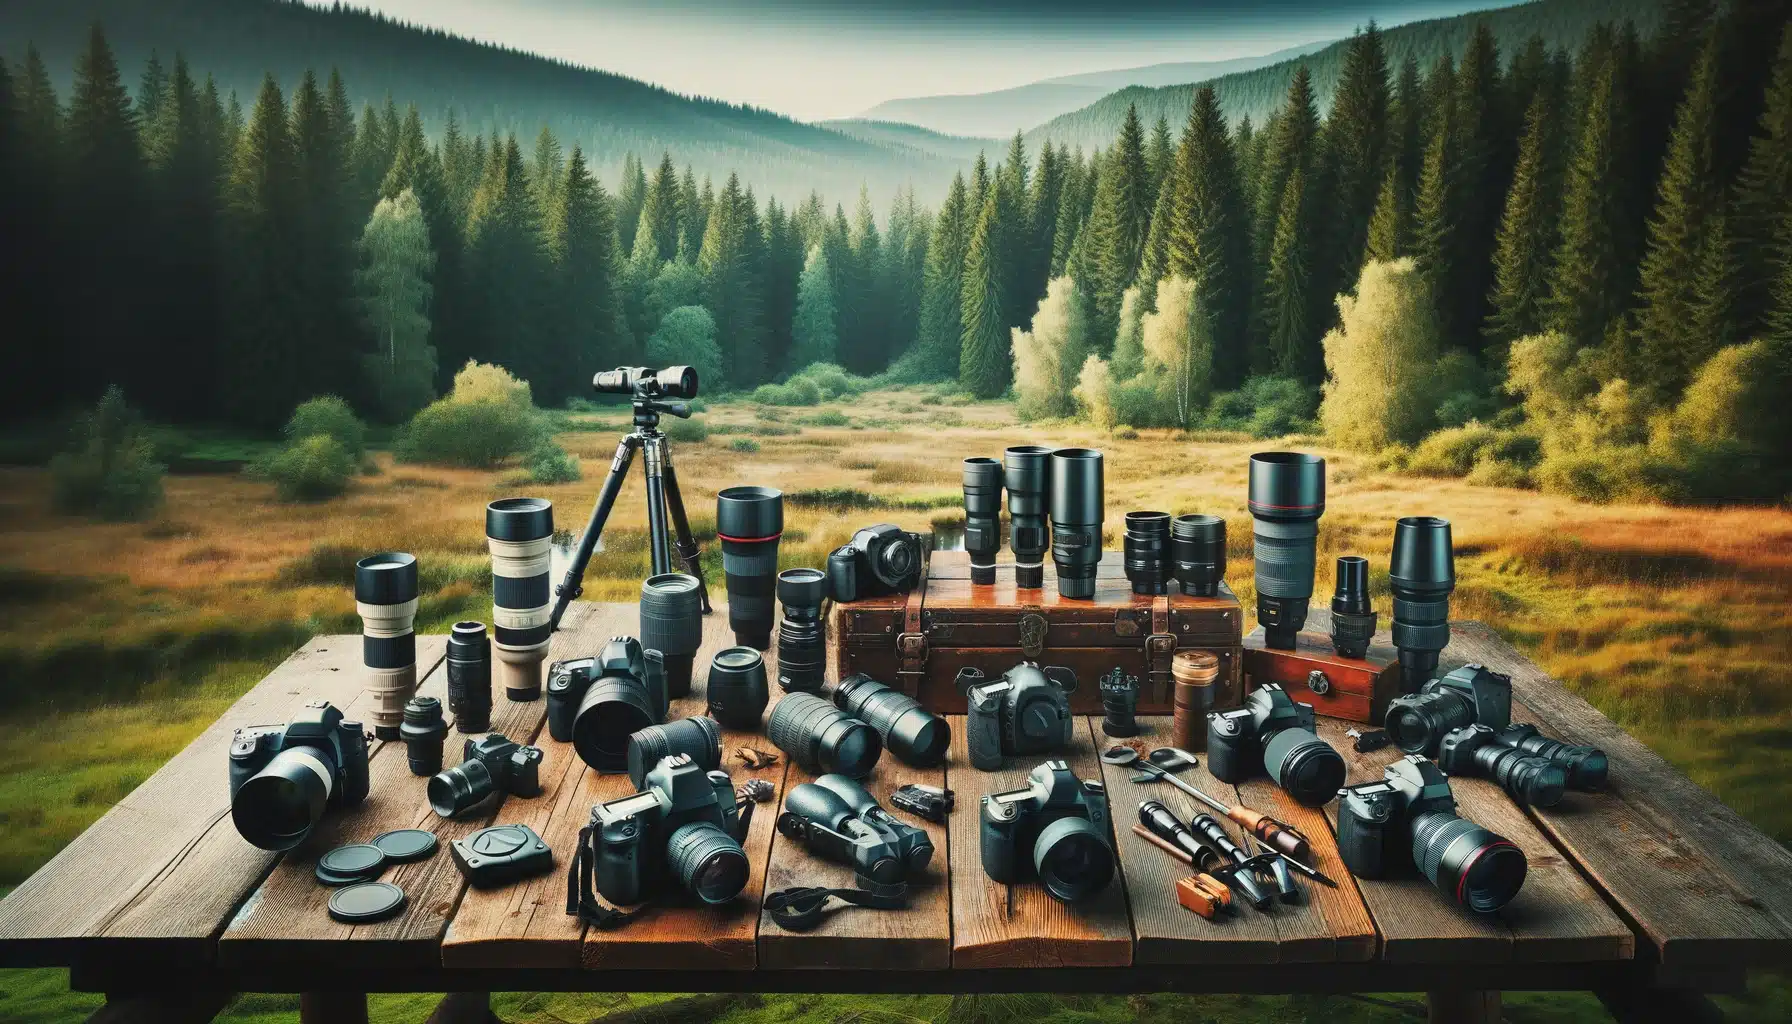 Various wildlife photography tools including cameras, lenses, and tripods are displayed on a rustic wooden table in a forest setting, demonstrating the essential equipment needed for capturing wildlife effectively.